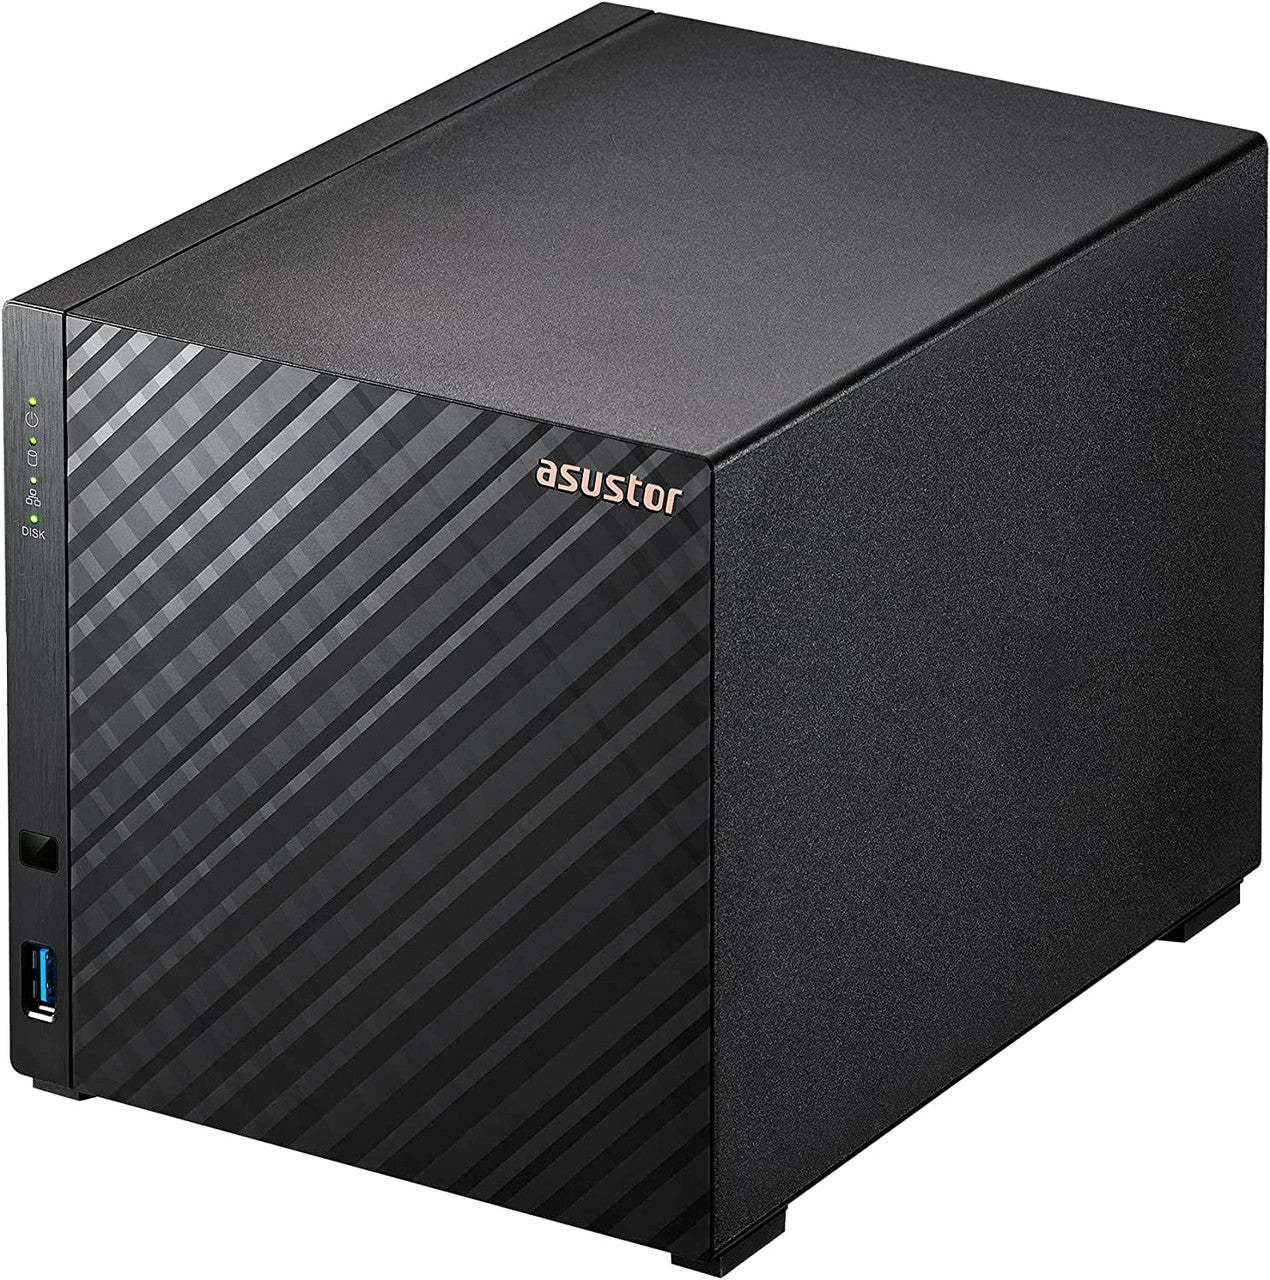 Asustor AS1104T 4-Bay Drivestor 4 NAS with 1GB RAM and 40TB (4x10TB) Seagate Ironwolf PRO Drives